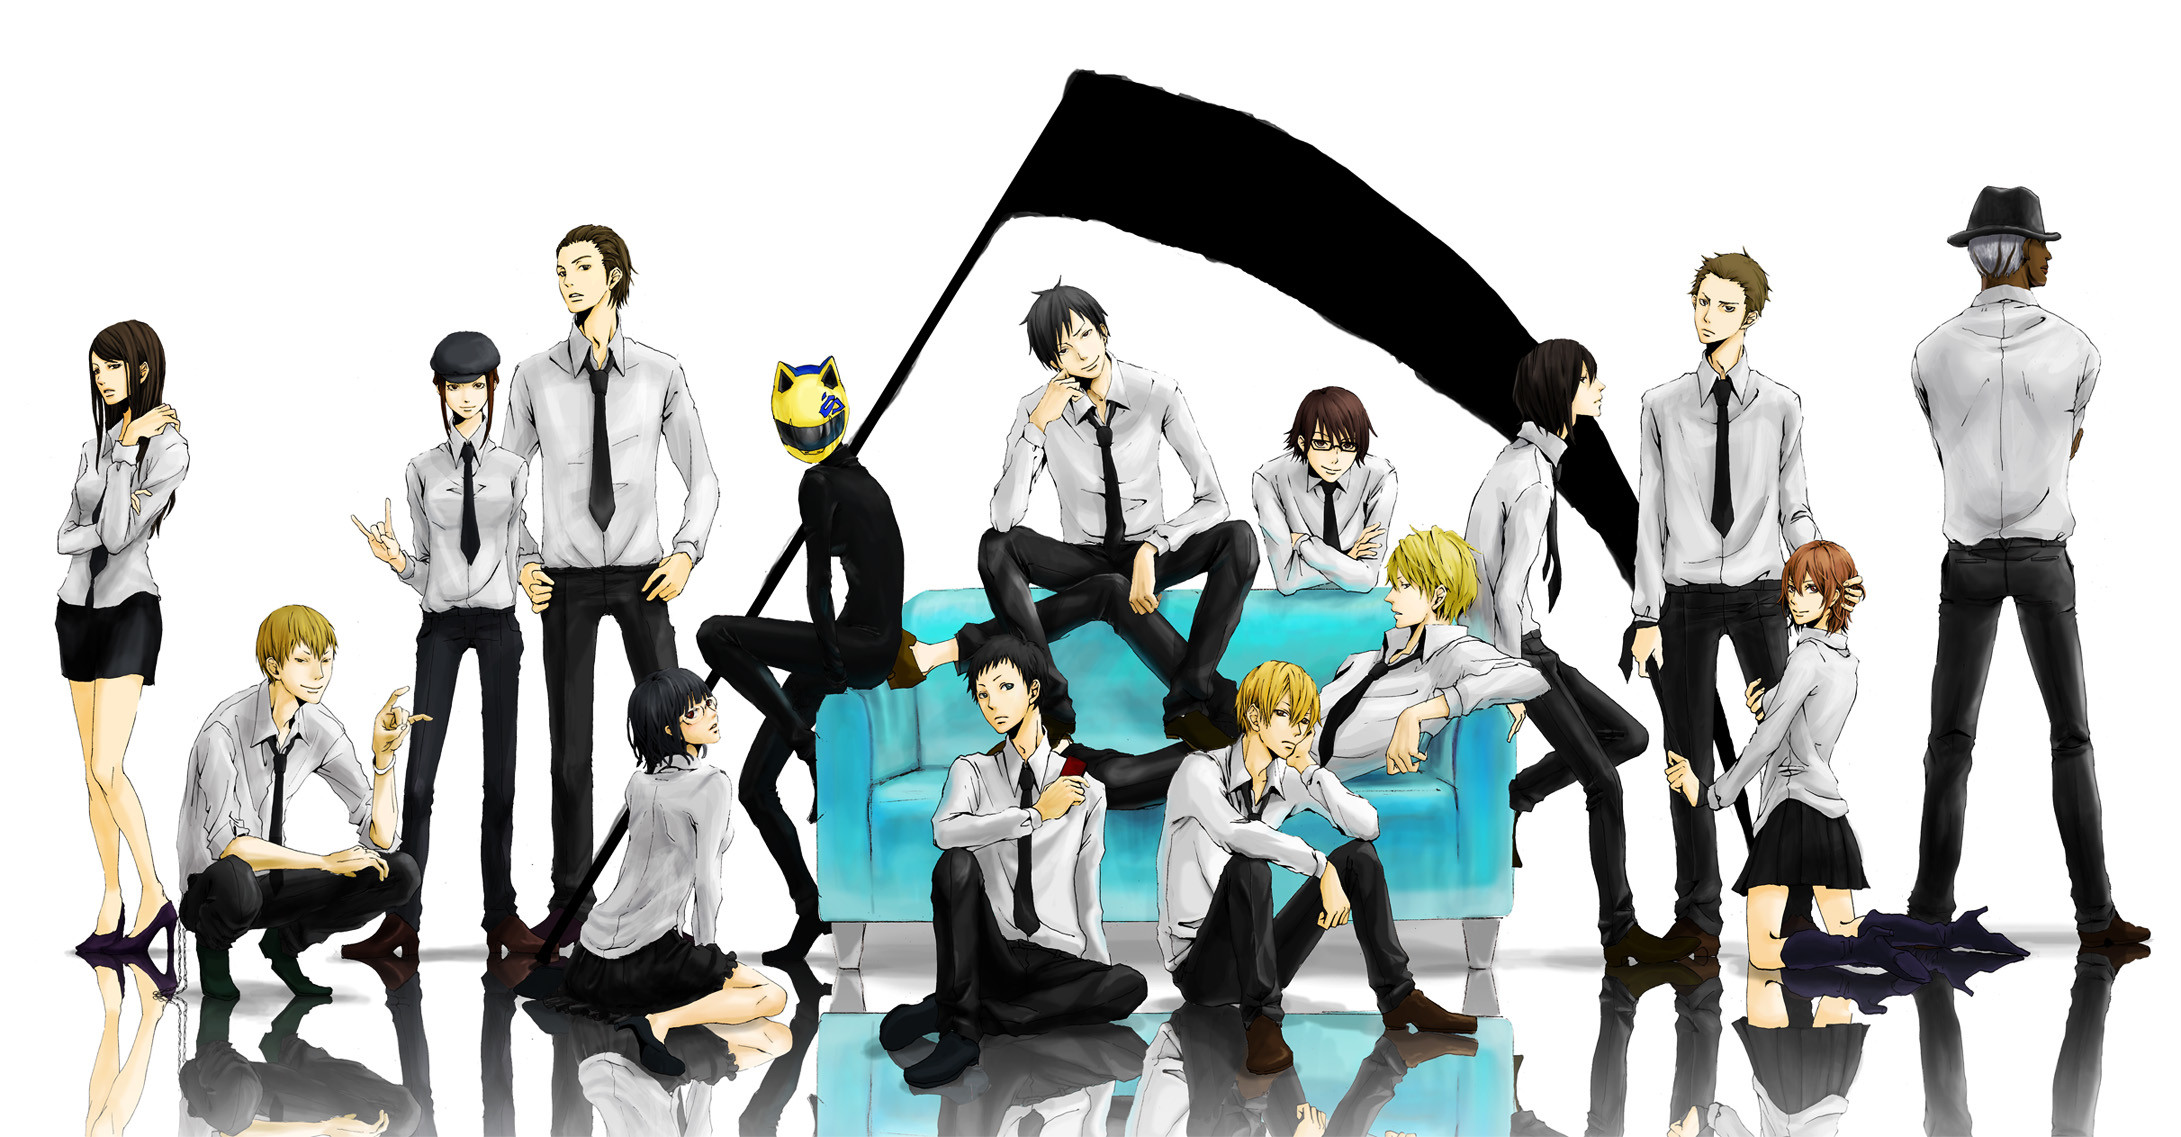 2181x1137 Anime Wallpapers Durarara!! HD 4K Download For Mobile iPhone & PC